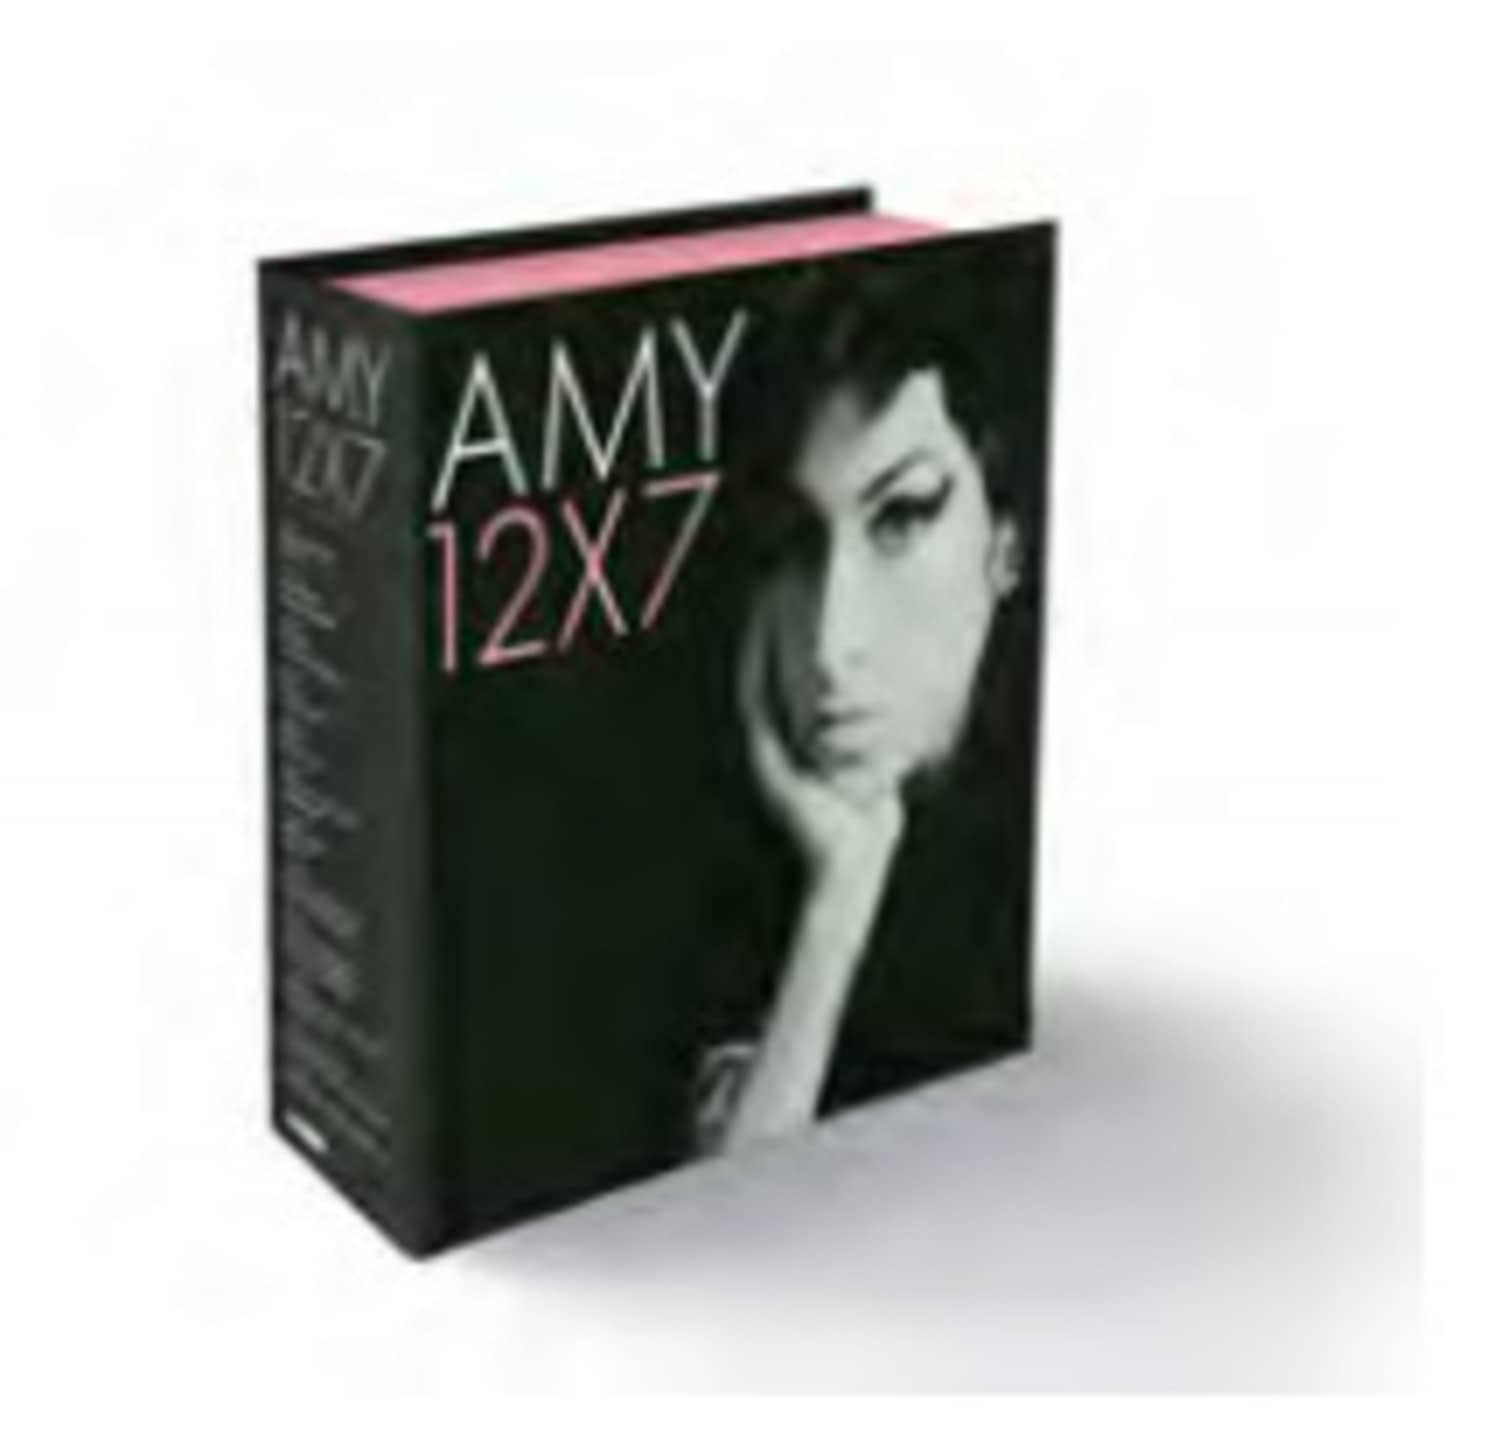 Amy Winehouse - 12X7: THE SINGLES COLLECTION 